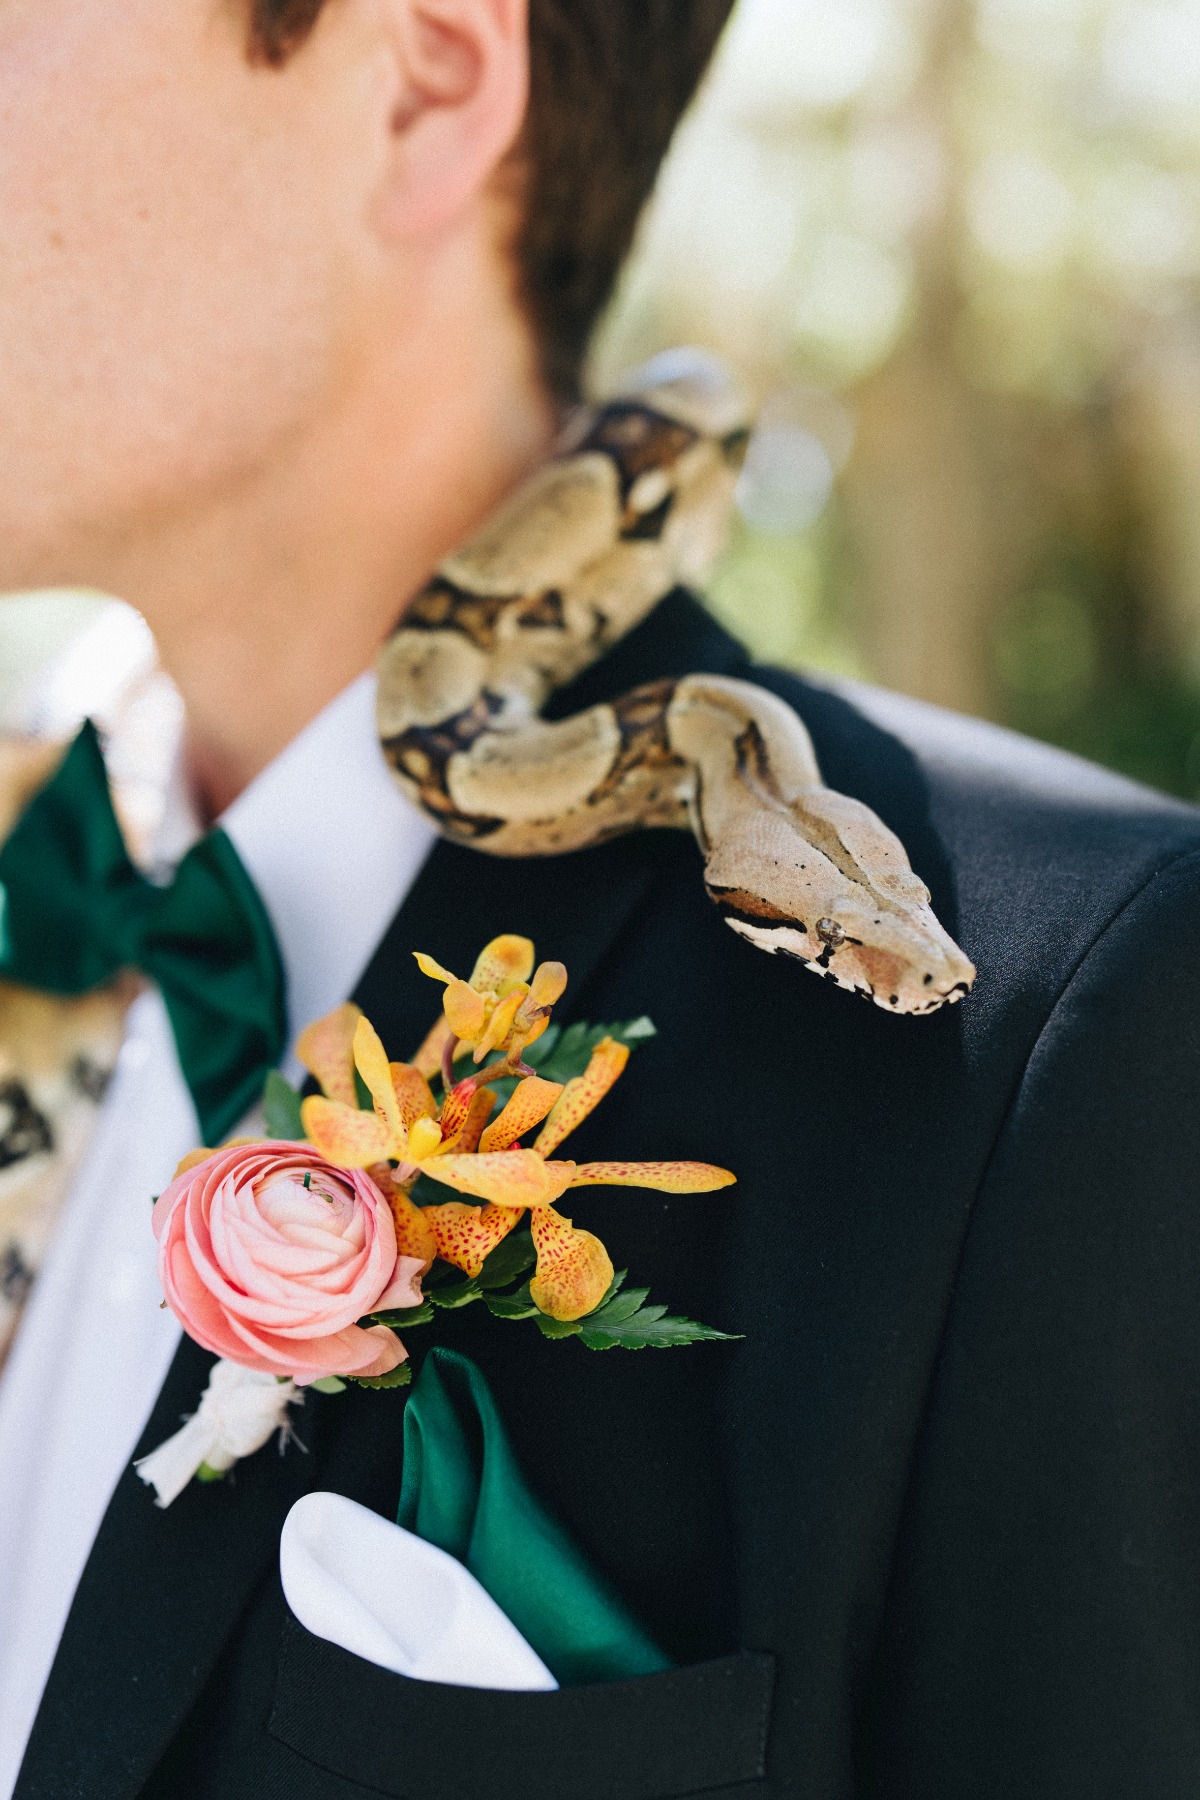 Groom with boutonniere and snake around his neck